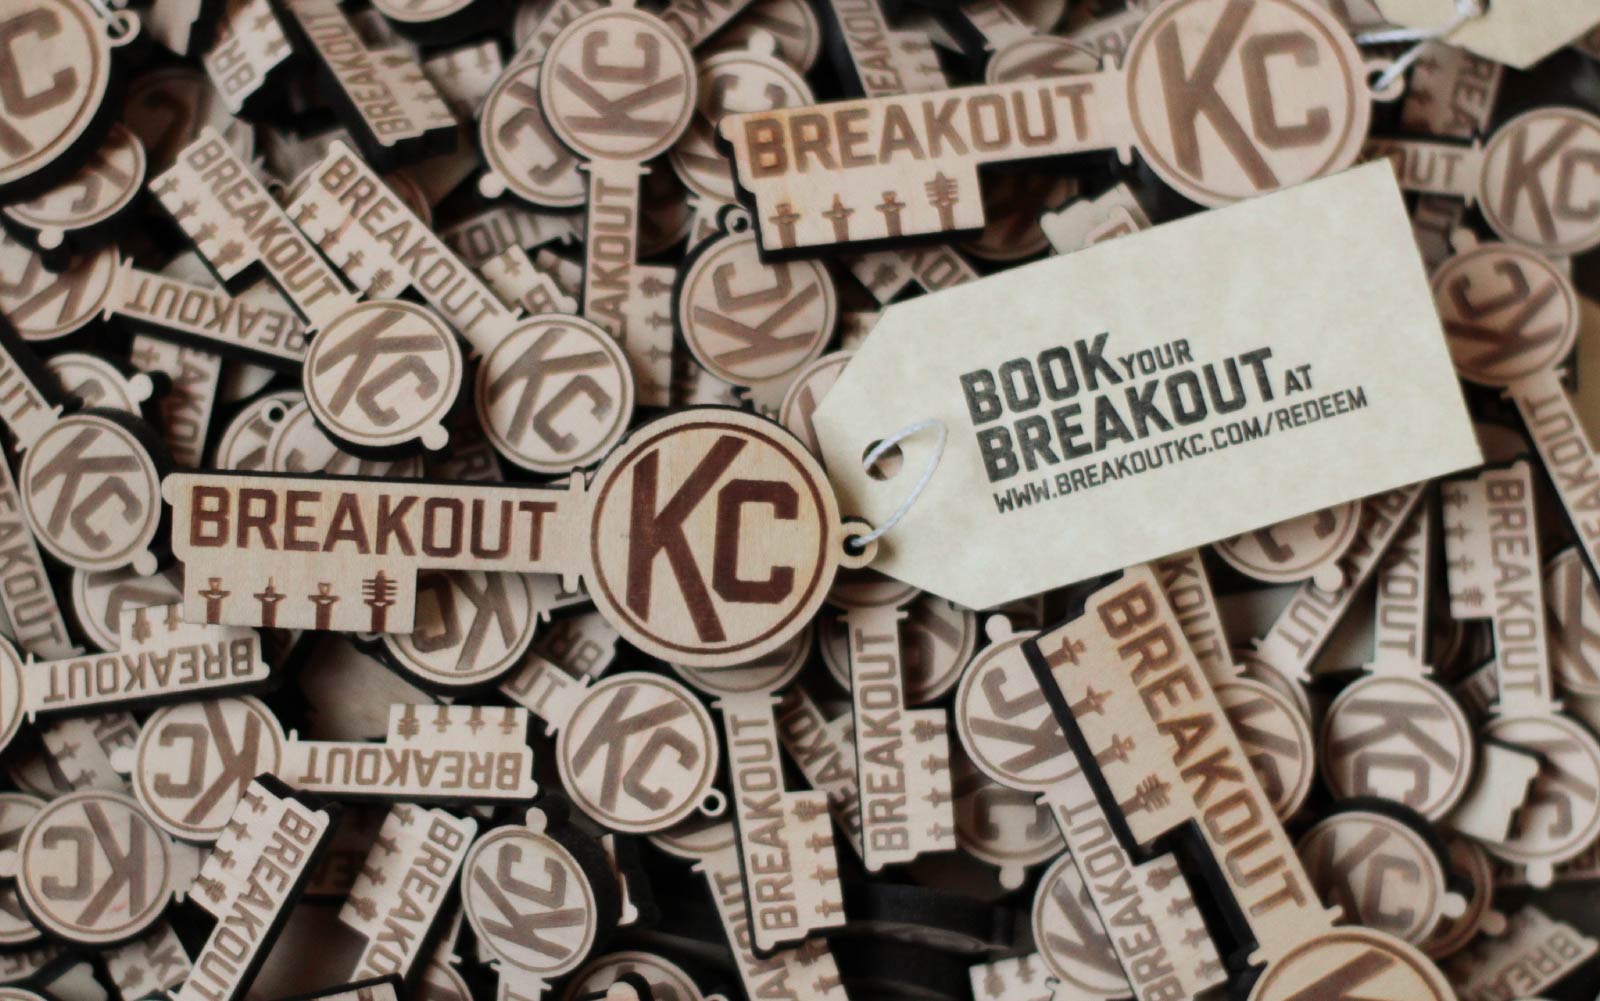 Redeem your gift key, gift card, or gift certificate - Breakout KC